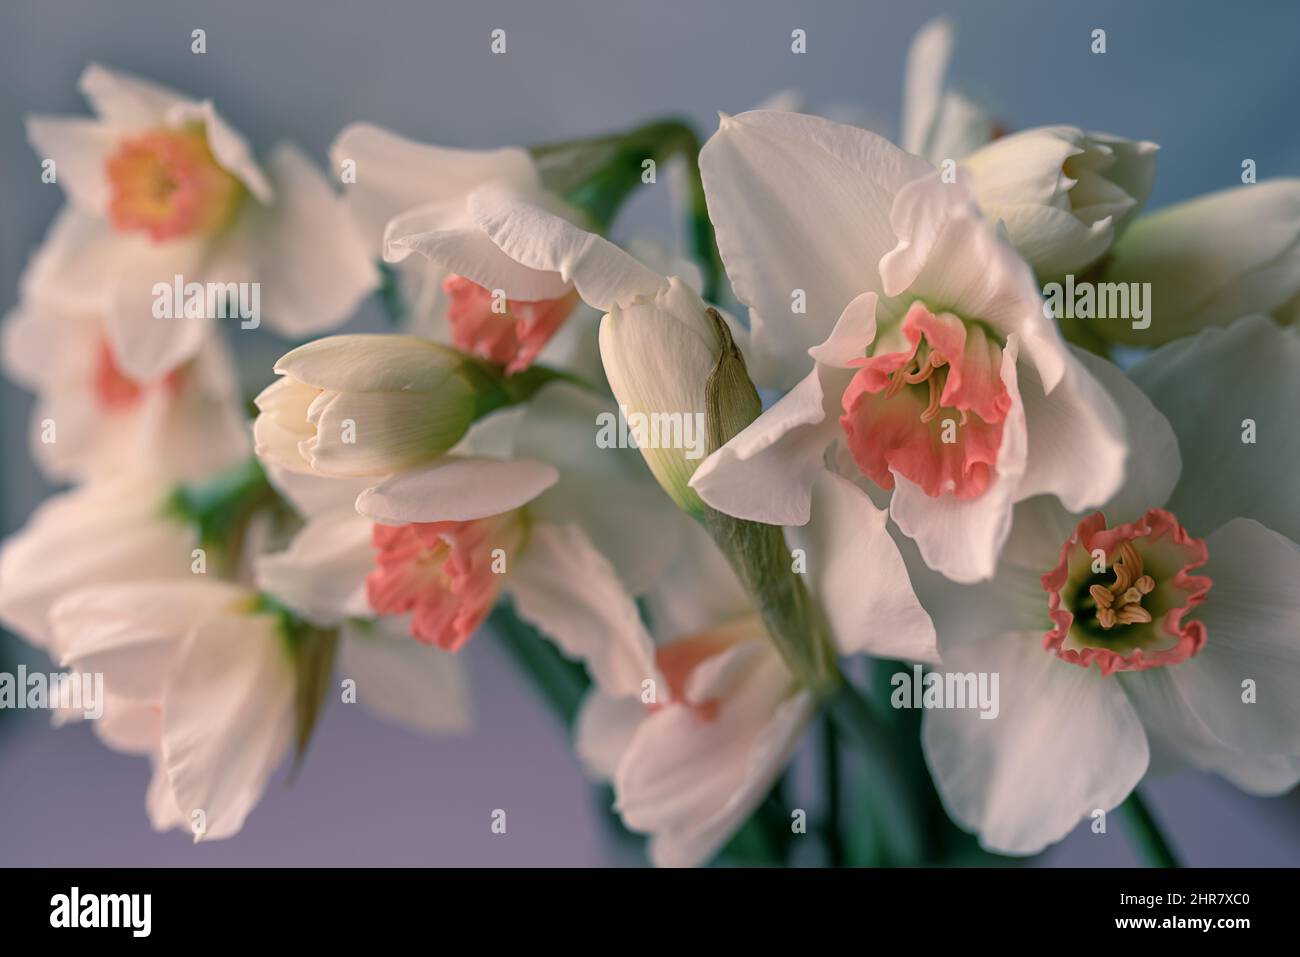 Close up image of a pretty white daffodils flowers. Stock Photo